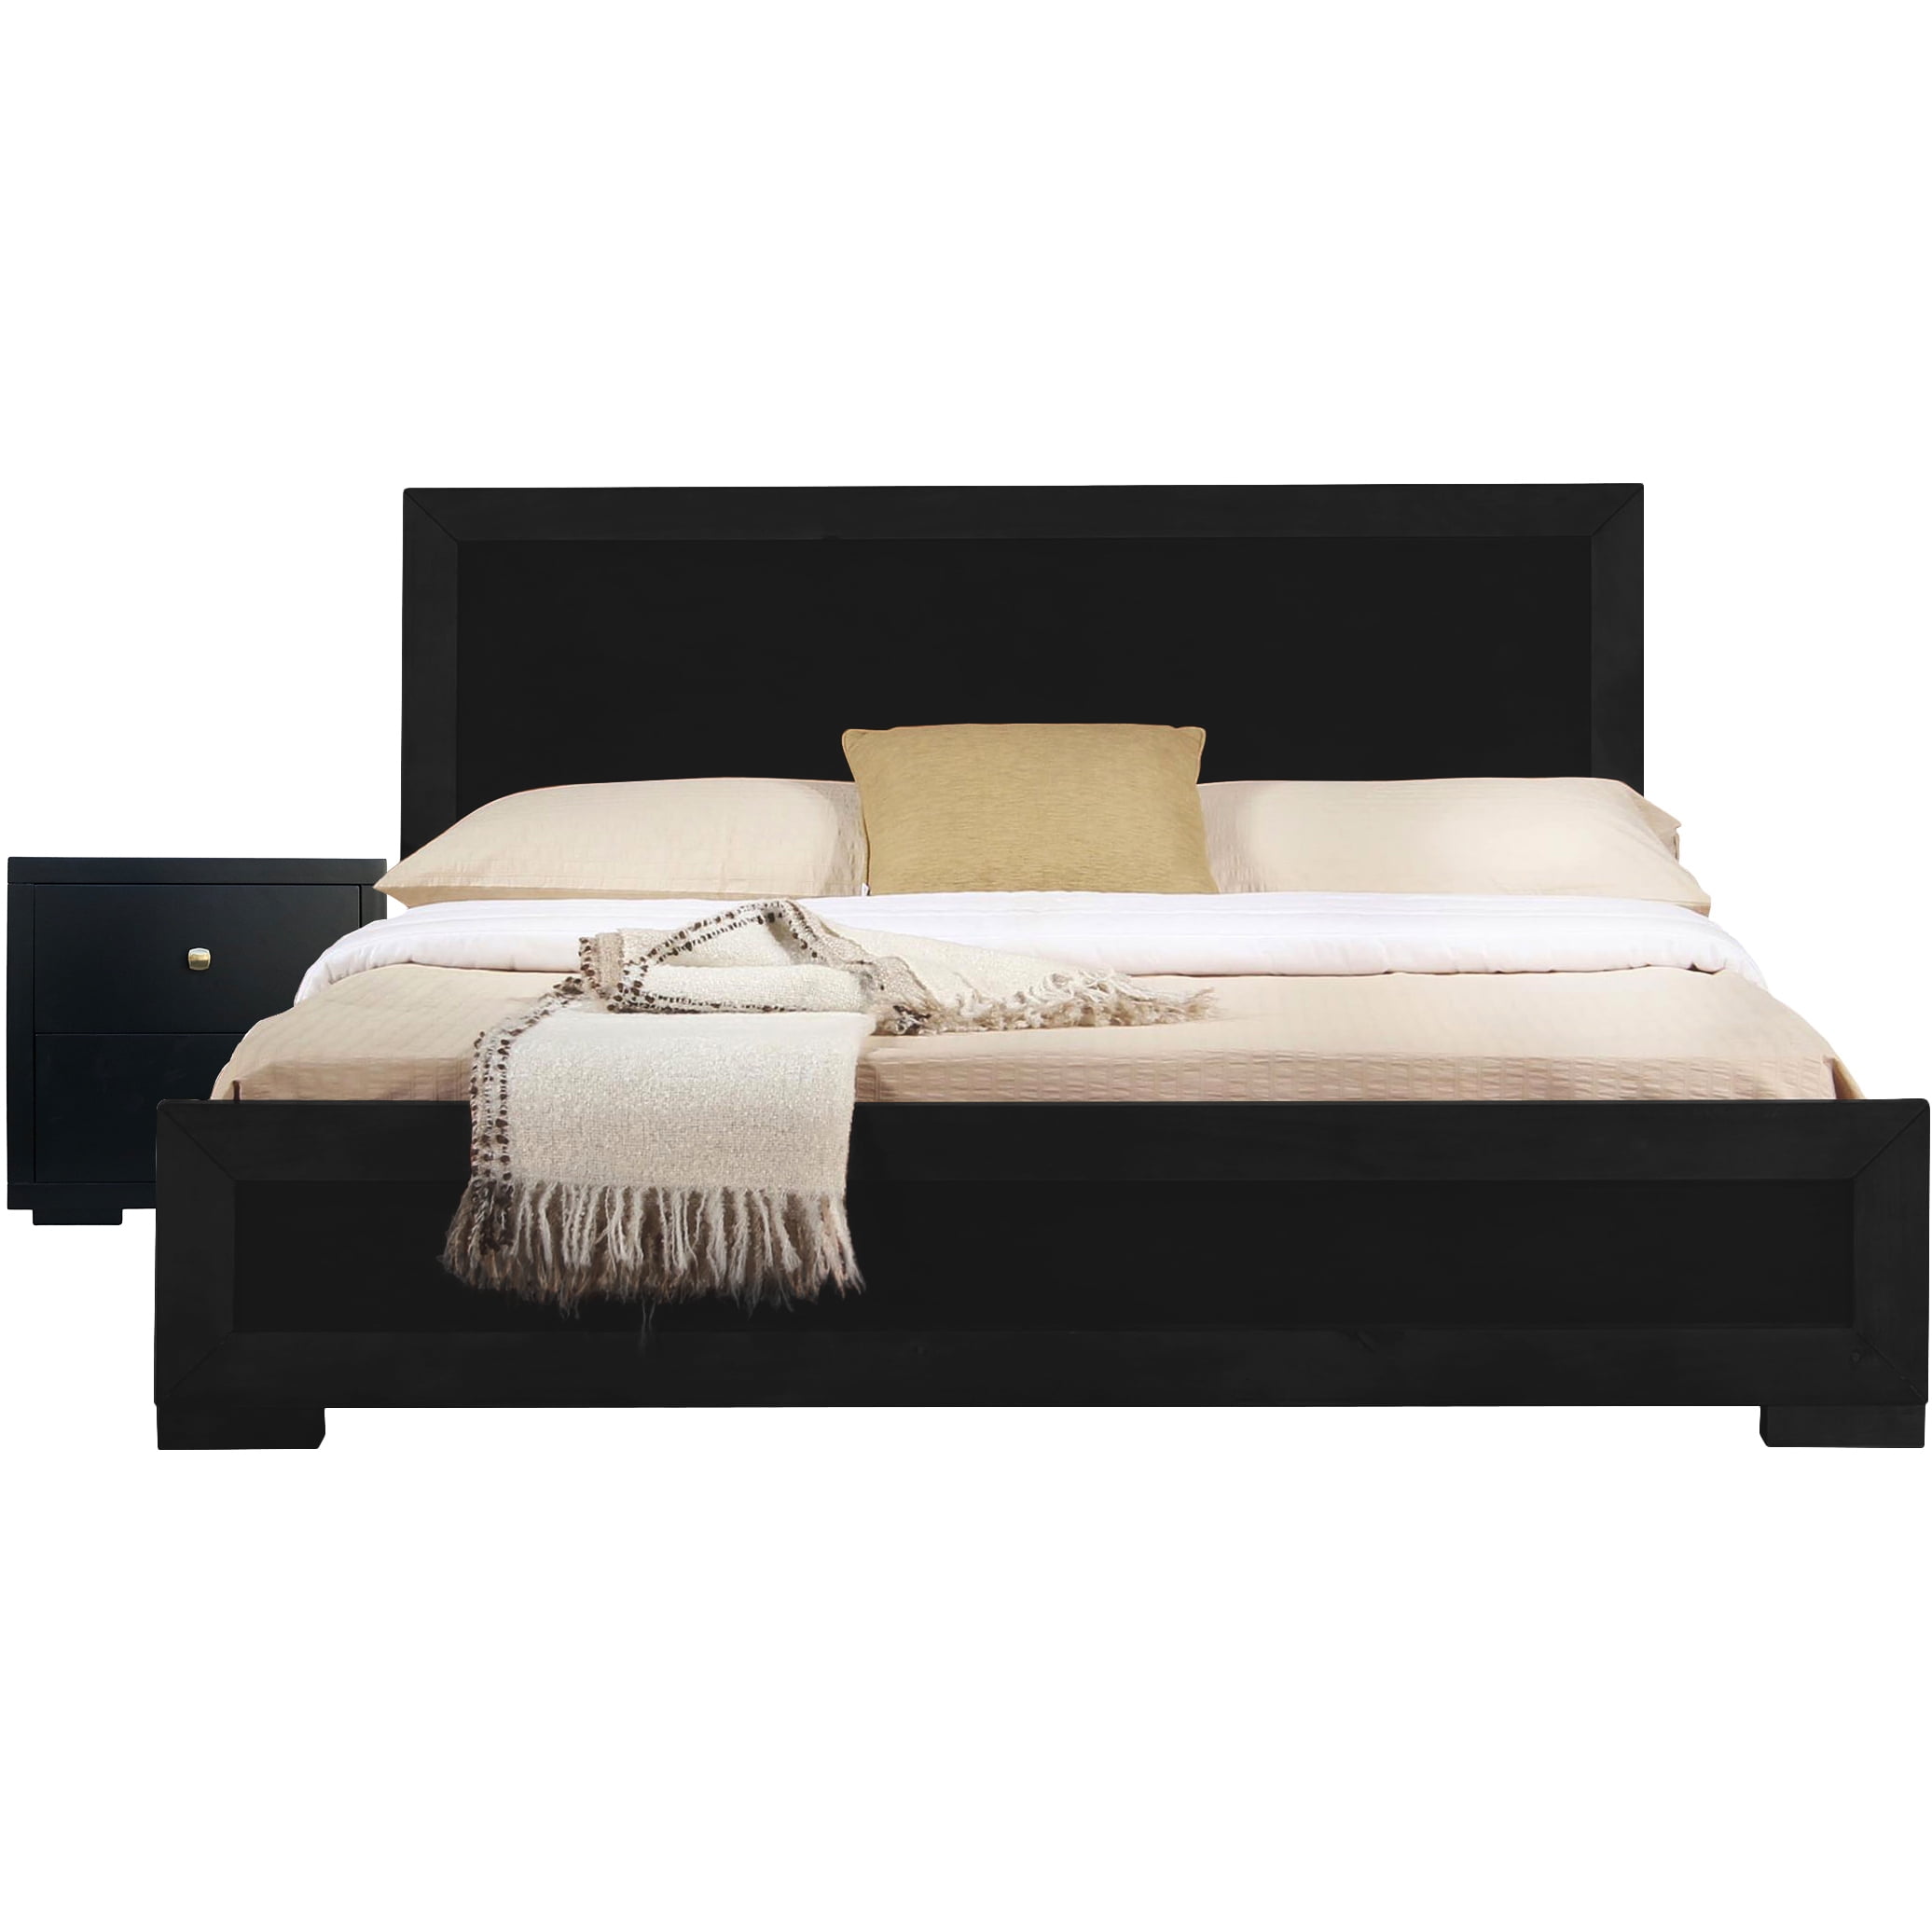 Picture of Camden Isle 312130 Trent Wooden Platform Bed in Black, Twin with 1 Nightstand